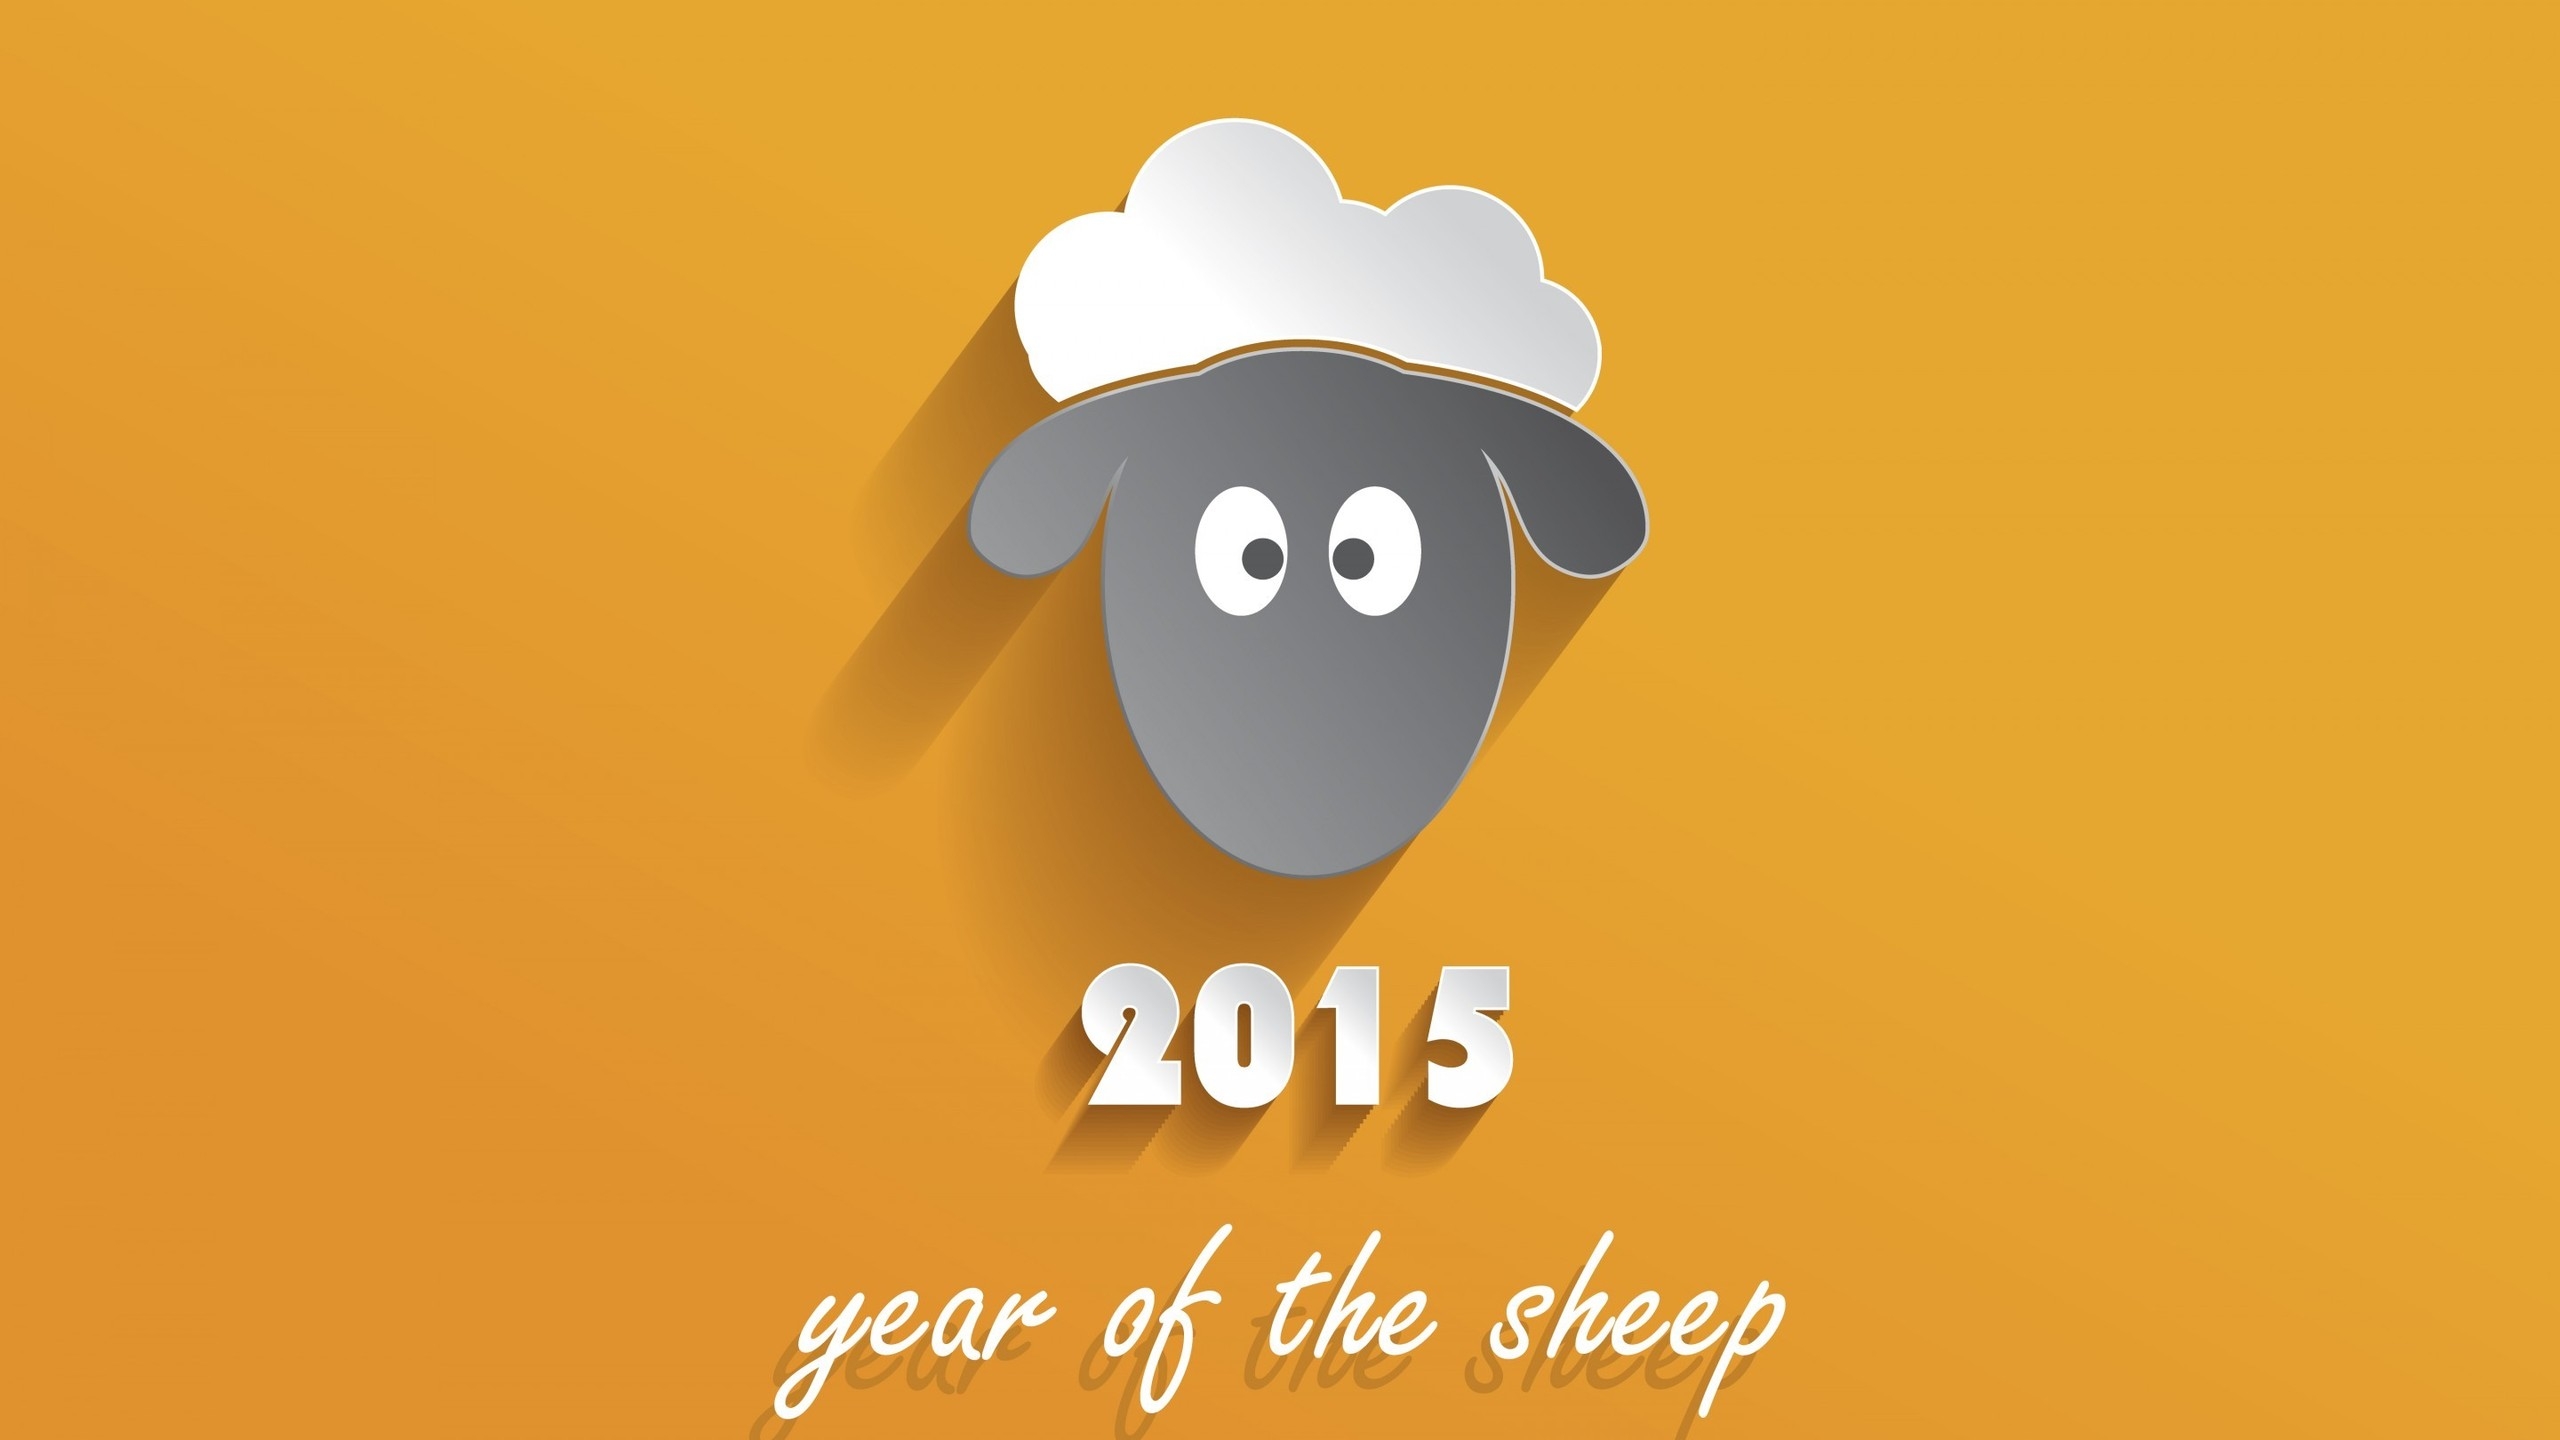 2015 Year of the Sheep for 2560x1440 HDTV resolution